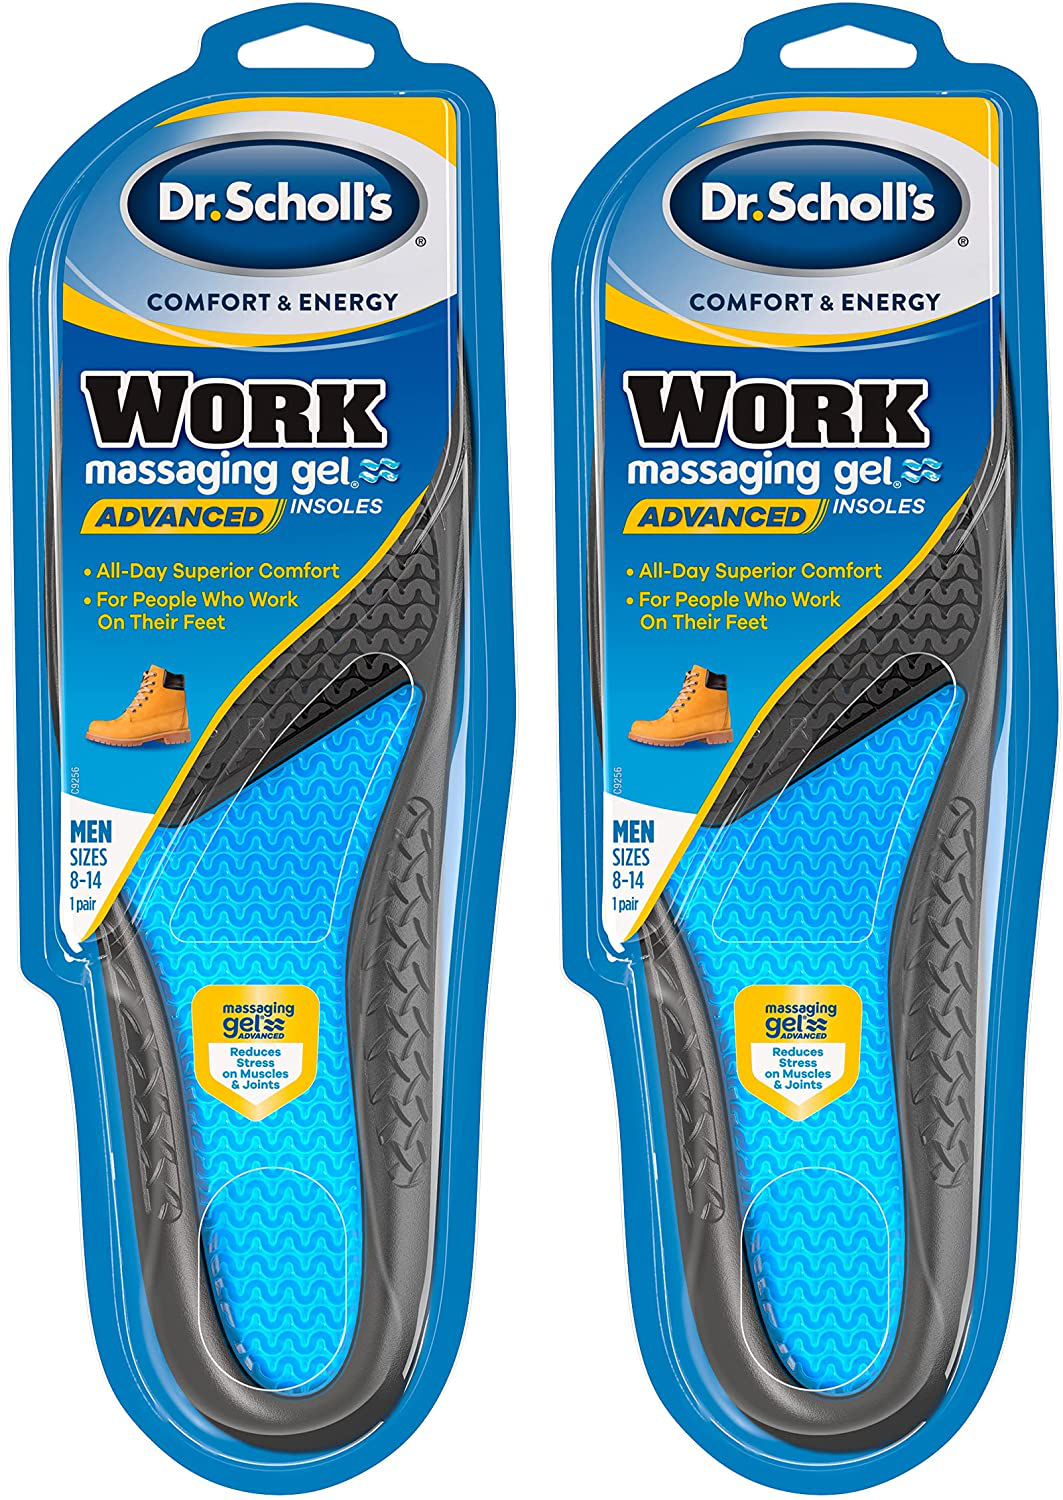 Dr. Scholl's Work Insoles All-Day Shock Absorption and Reinforced Arch Support that Fits in Work Boots and More 